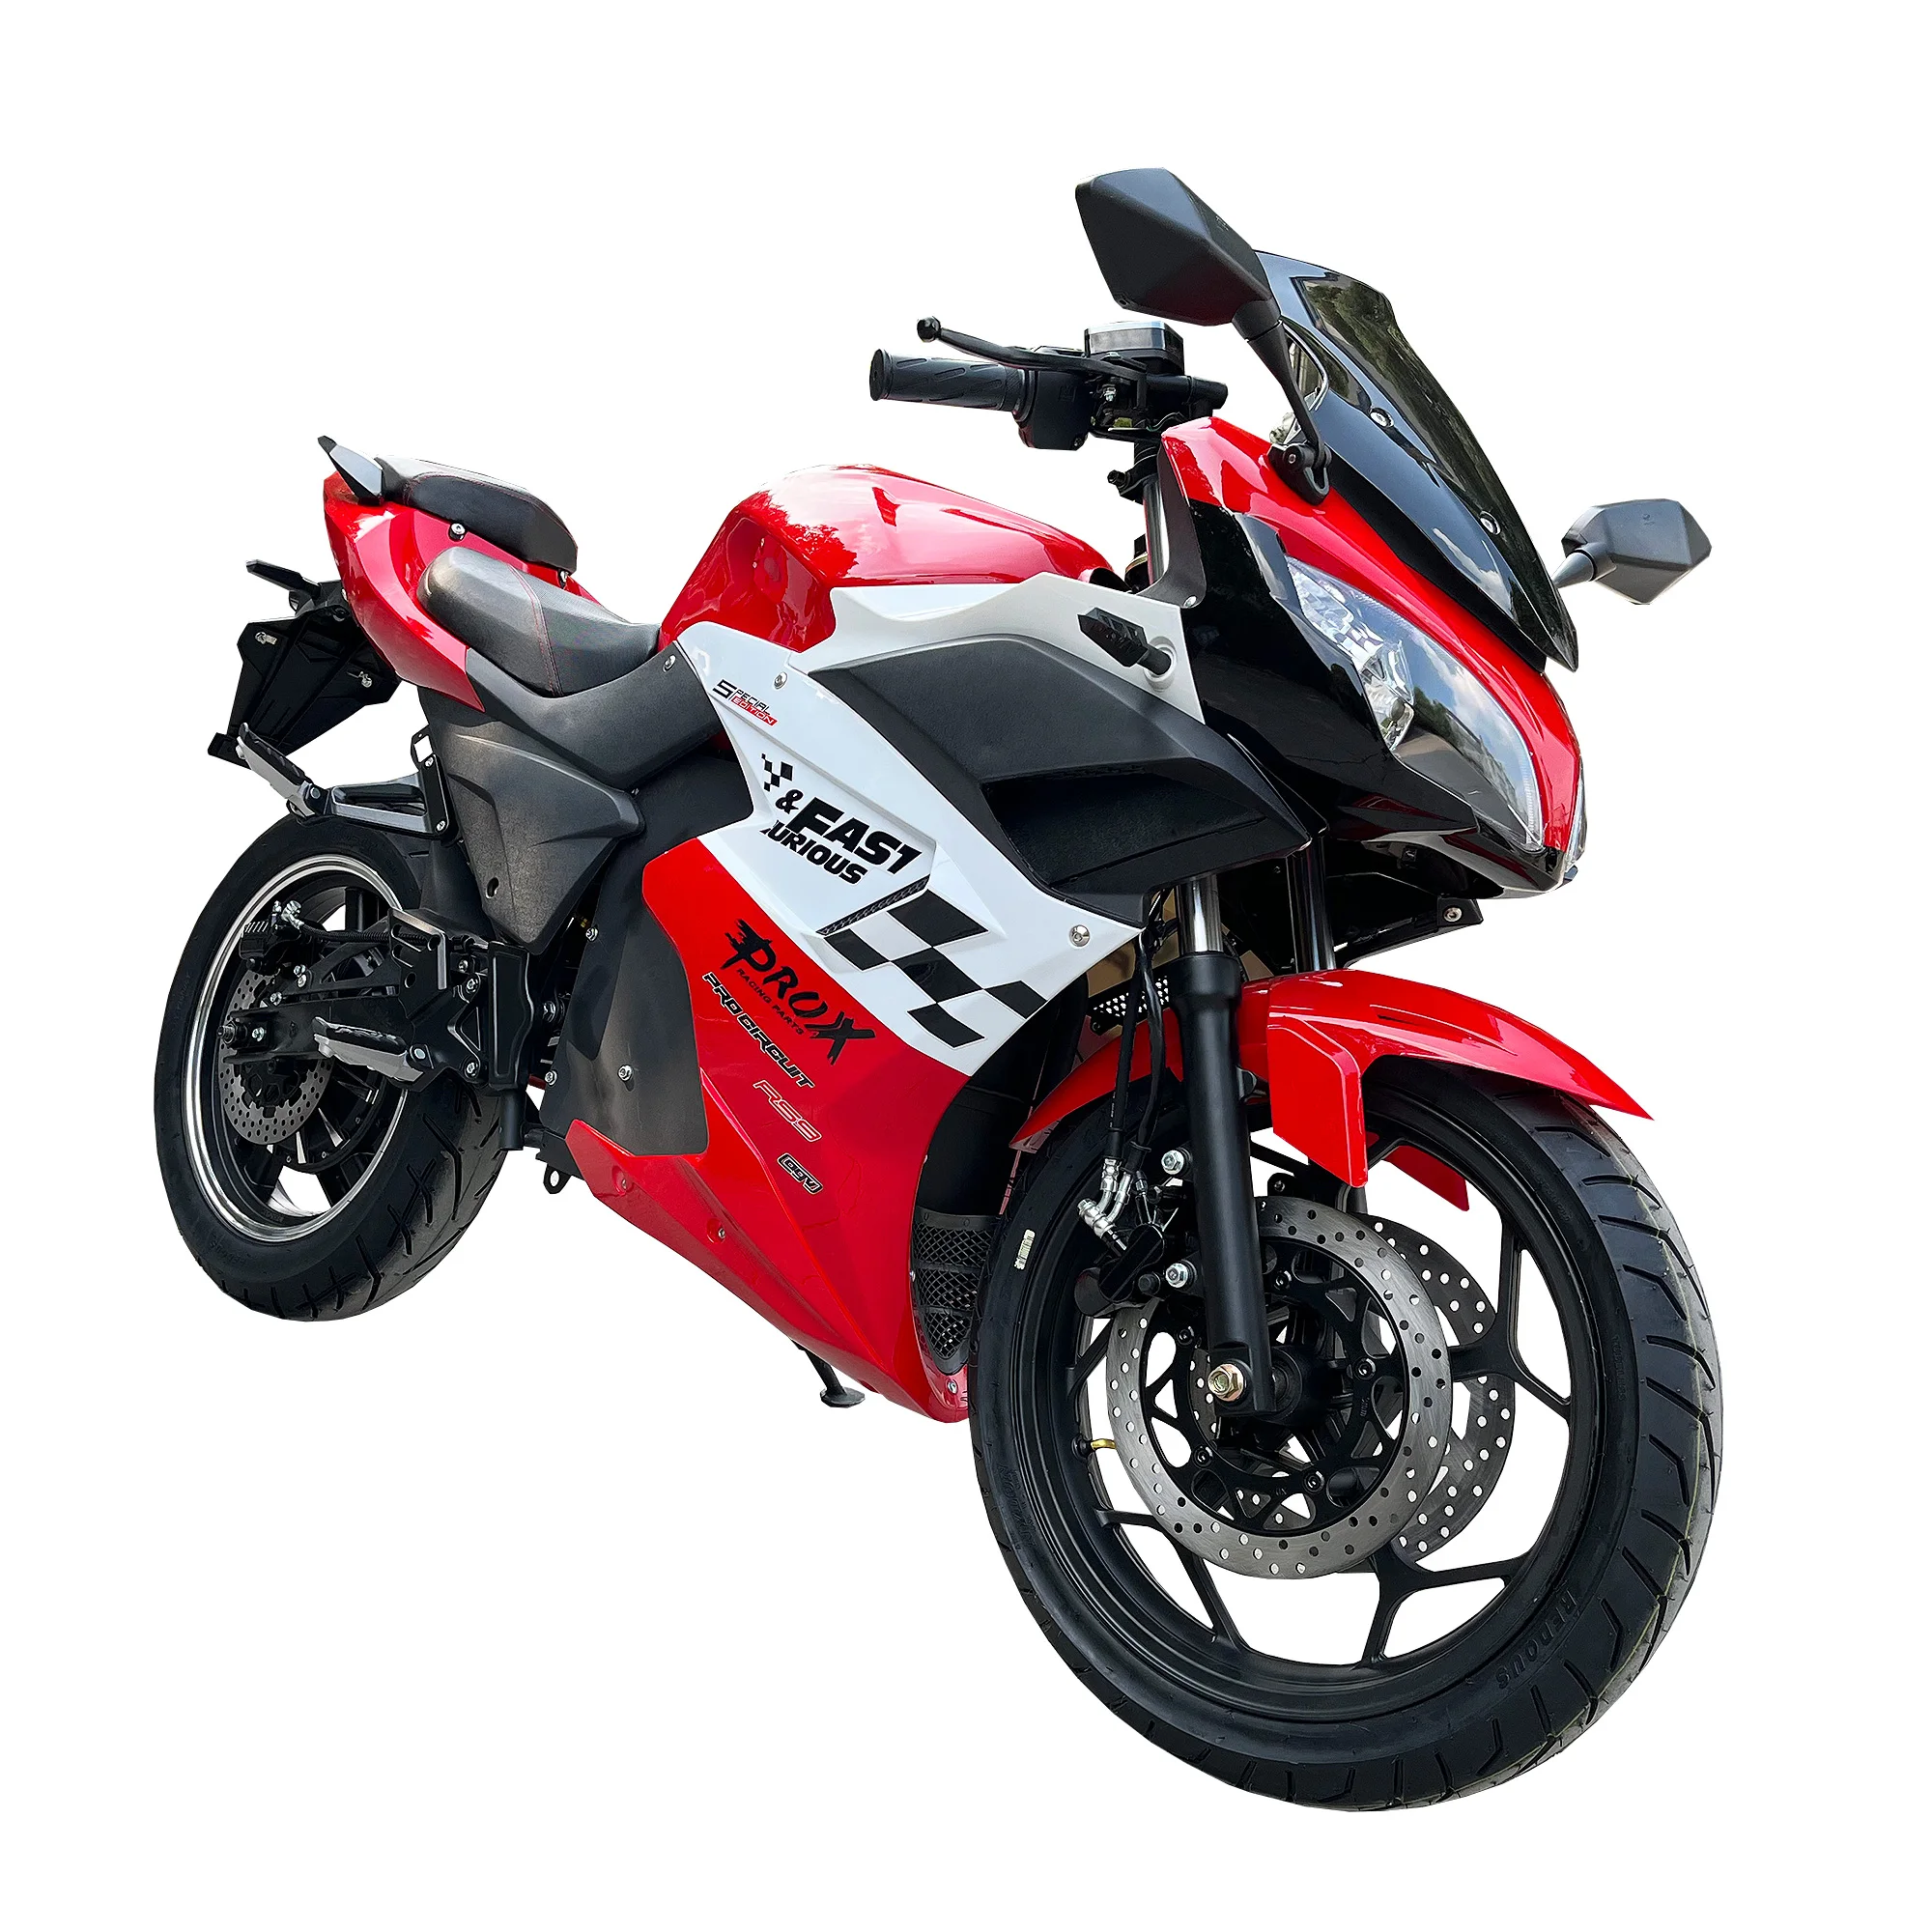 Speed motorbike 120km/h 10000w hub motor electric motorcycle with factory price adult motor 10000w electric motorcycle with speed up to 180km